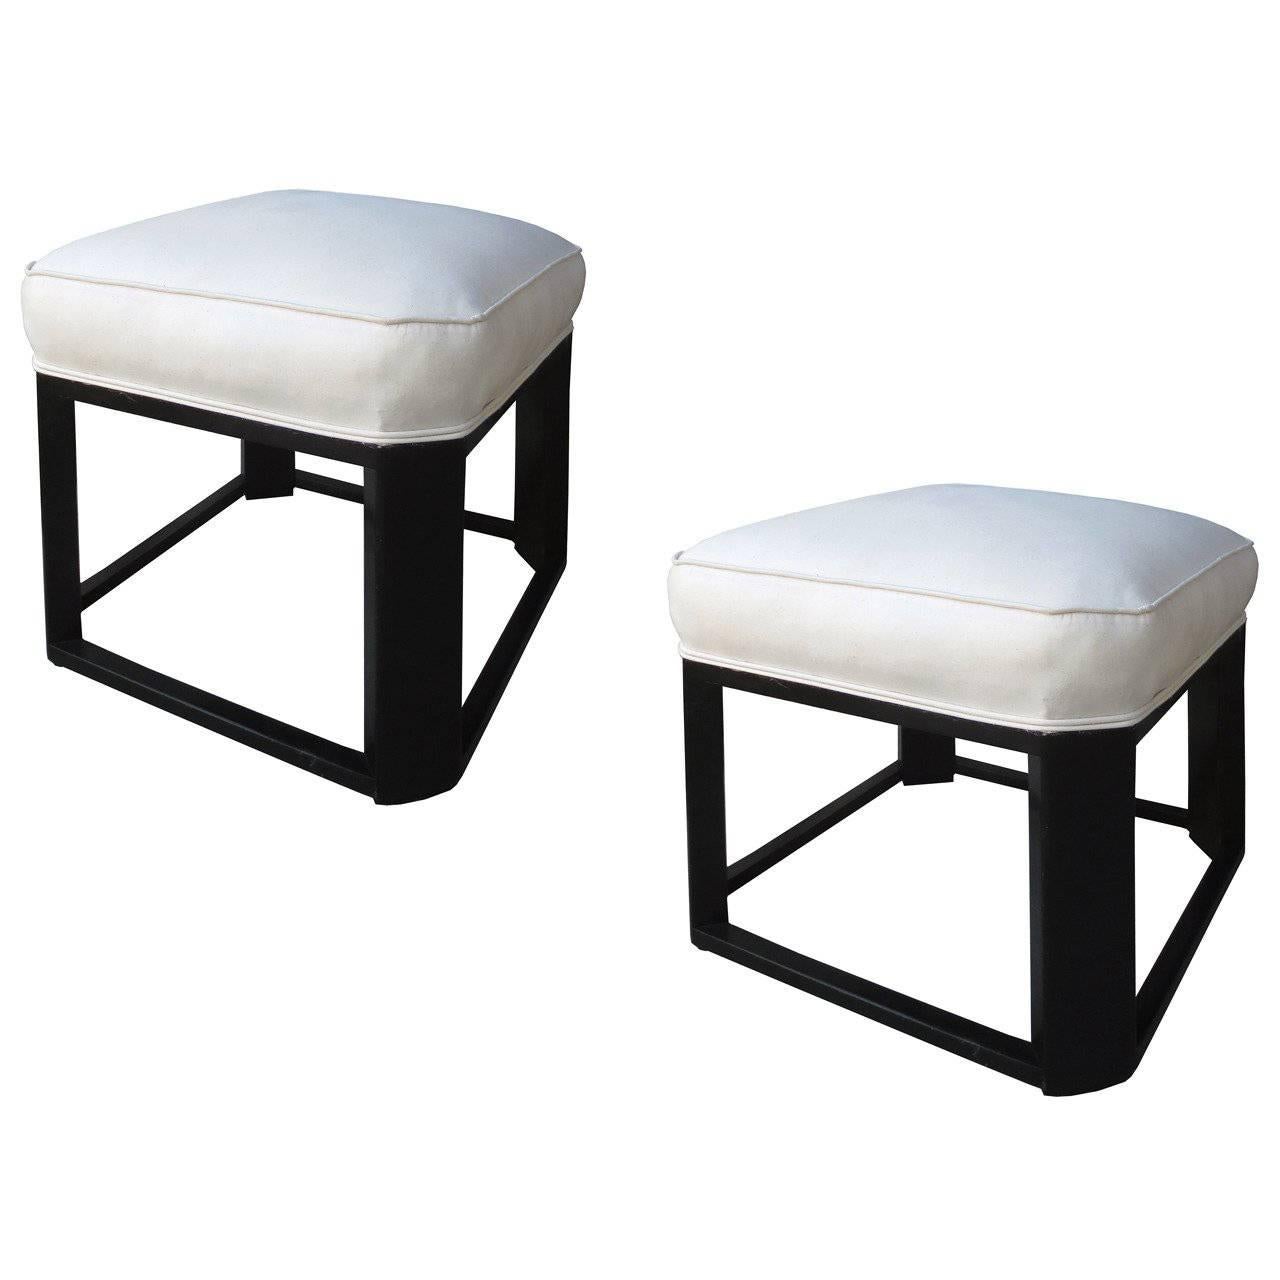 Pair of Art Deco Stools, Possibly of the Period